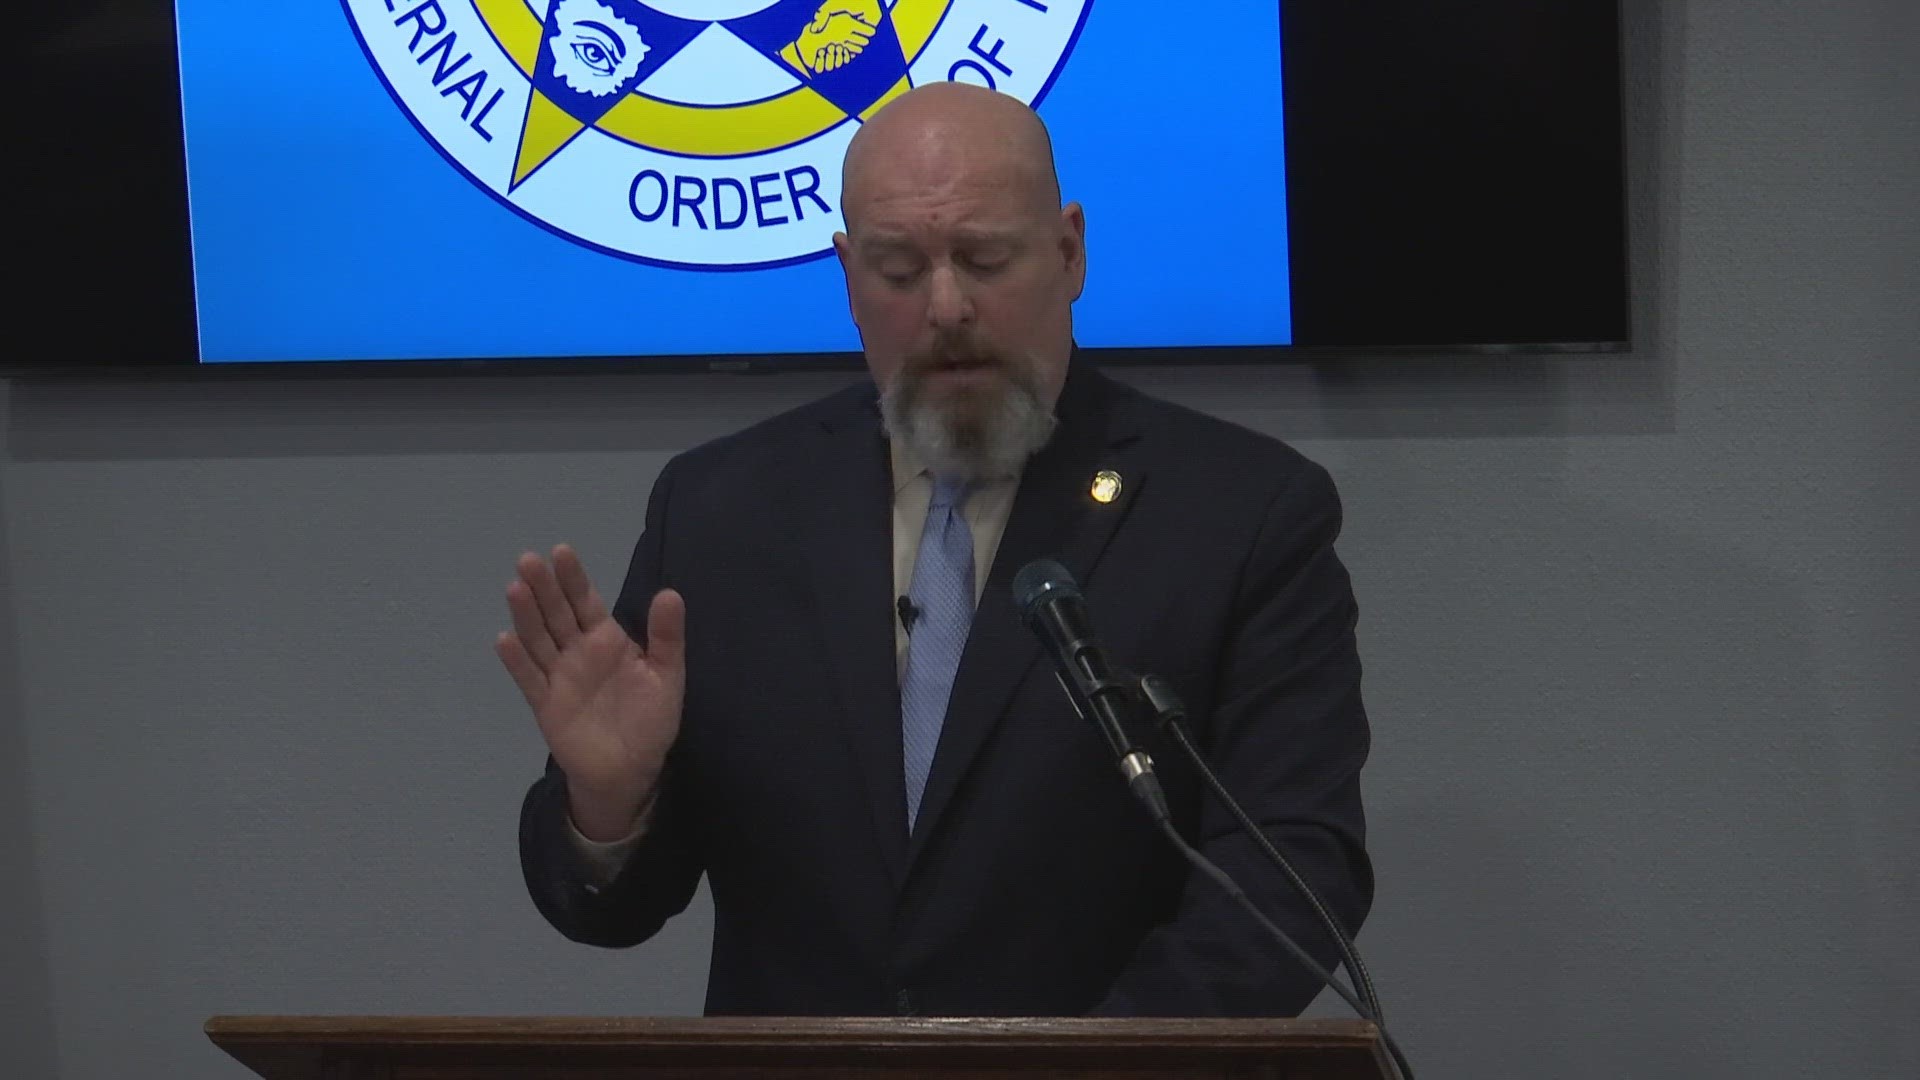 Indy FOP president Rick Snyder called for the removal of judge Mark Stoner after Elliahs Dorsey's sentence of 25 years for killing Ofc. Breann Leath in 2020.